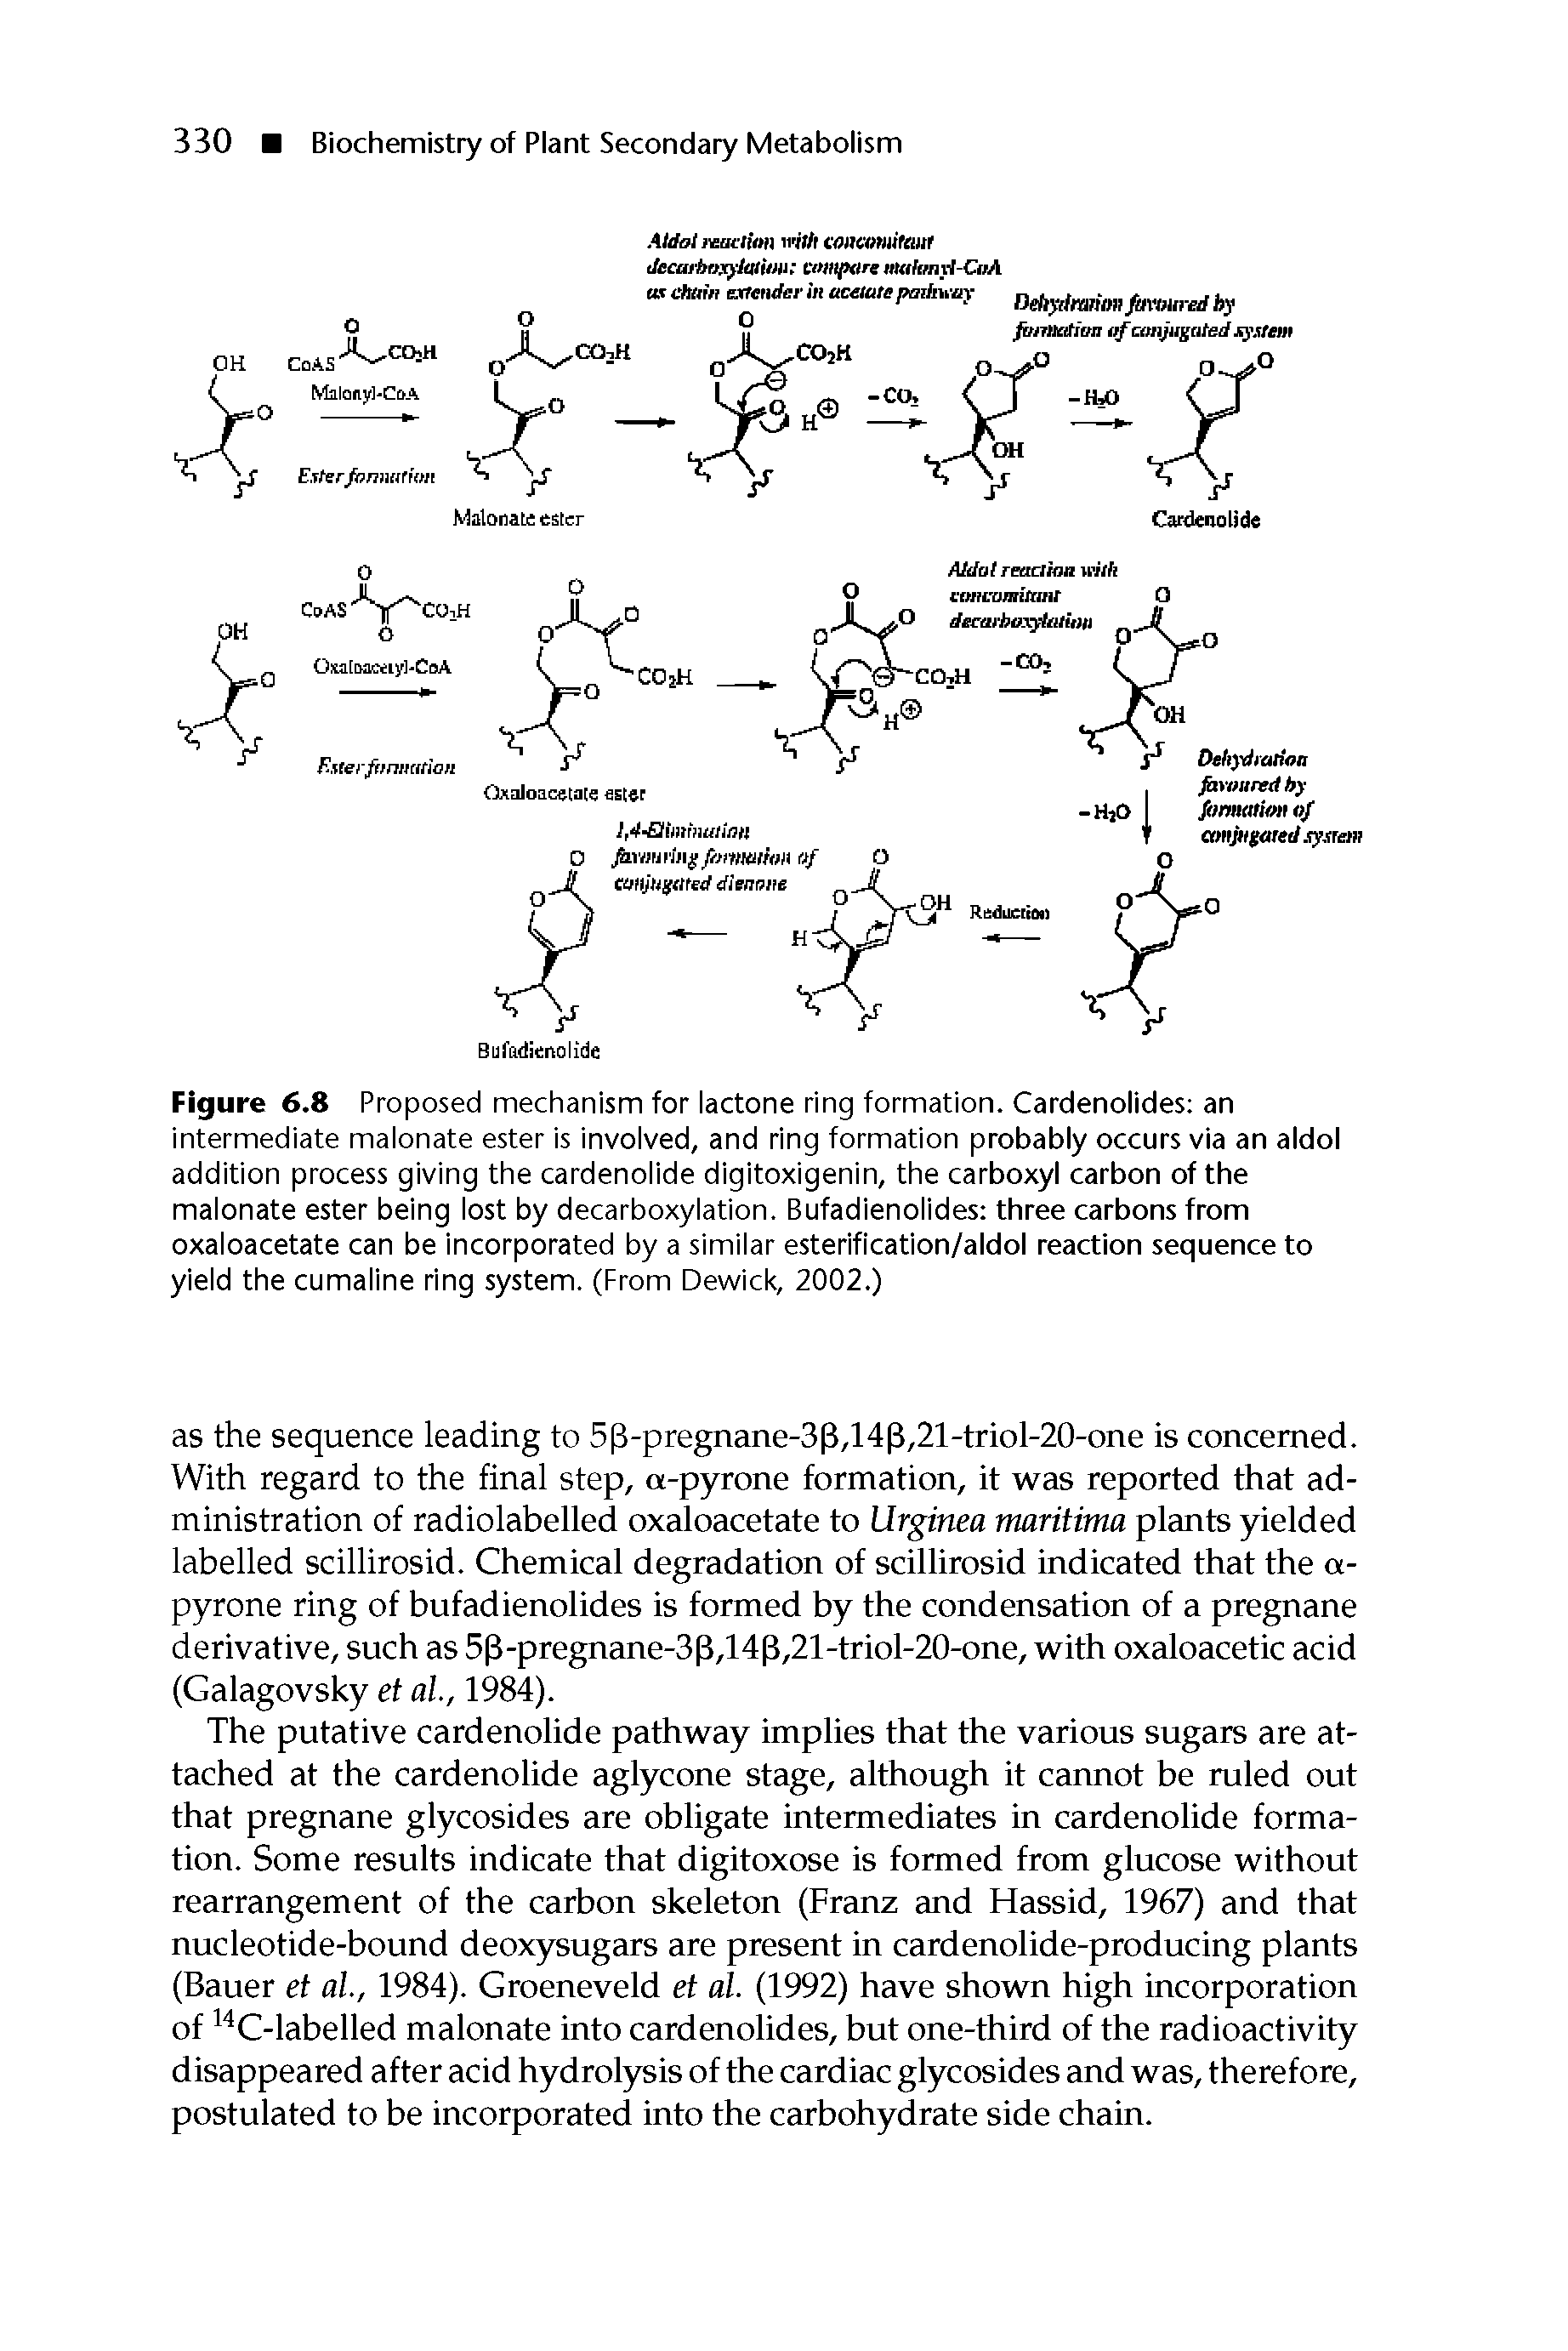 Figure 6.8 Proposed mechanism for lactone ring formation. Cardenolides an intermediate malonate ester is involved, and ring formation probably occurs via an aldol addition process giving the cardenolide digitoxigenin, the carboxyl carbon of the malonate ester being lost by decarboxylation. Bufadienolides three carbons from oxaloacetate can be incorporated by a similar esterification/aldol reaction sequence to yield the cumaline ring system. (From Dewick, 2002.)...